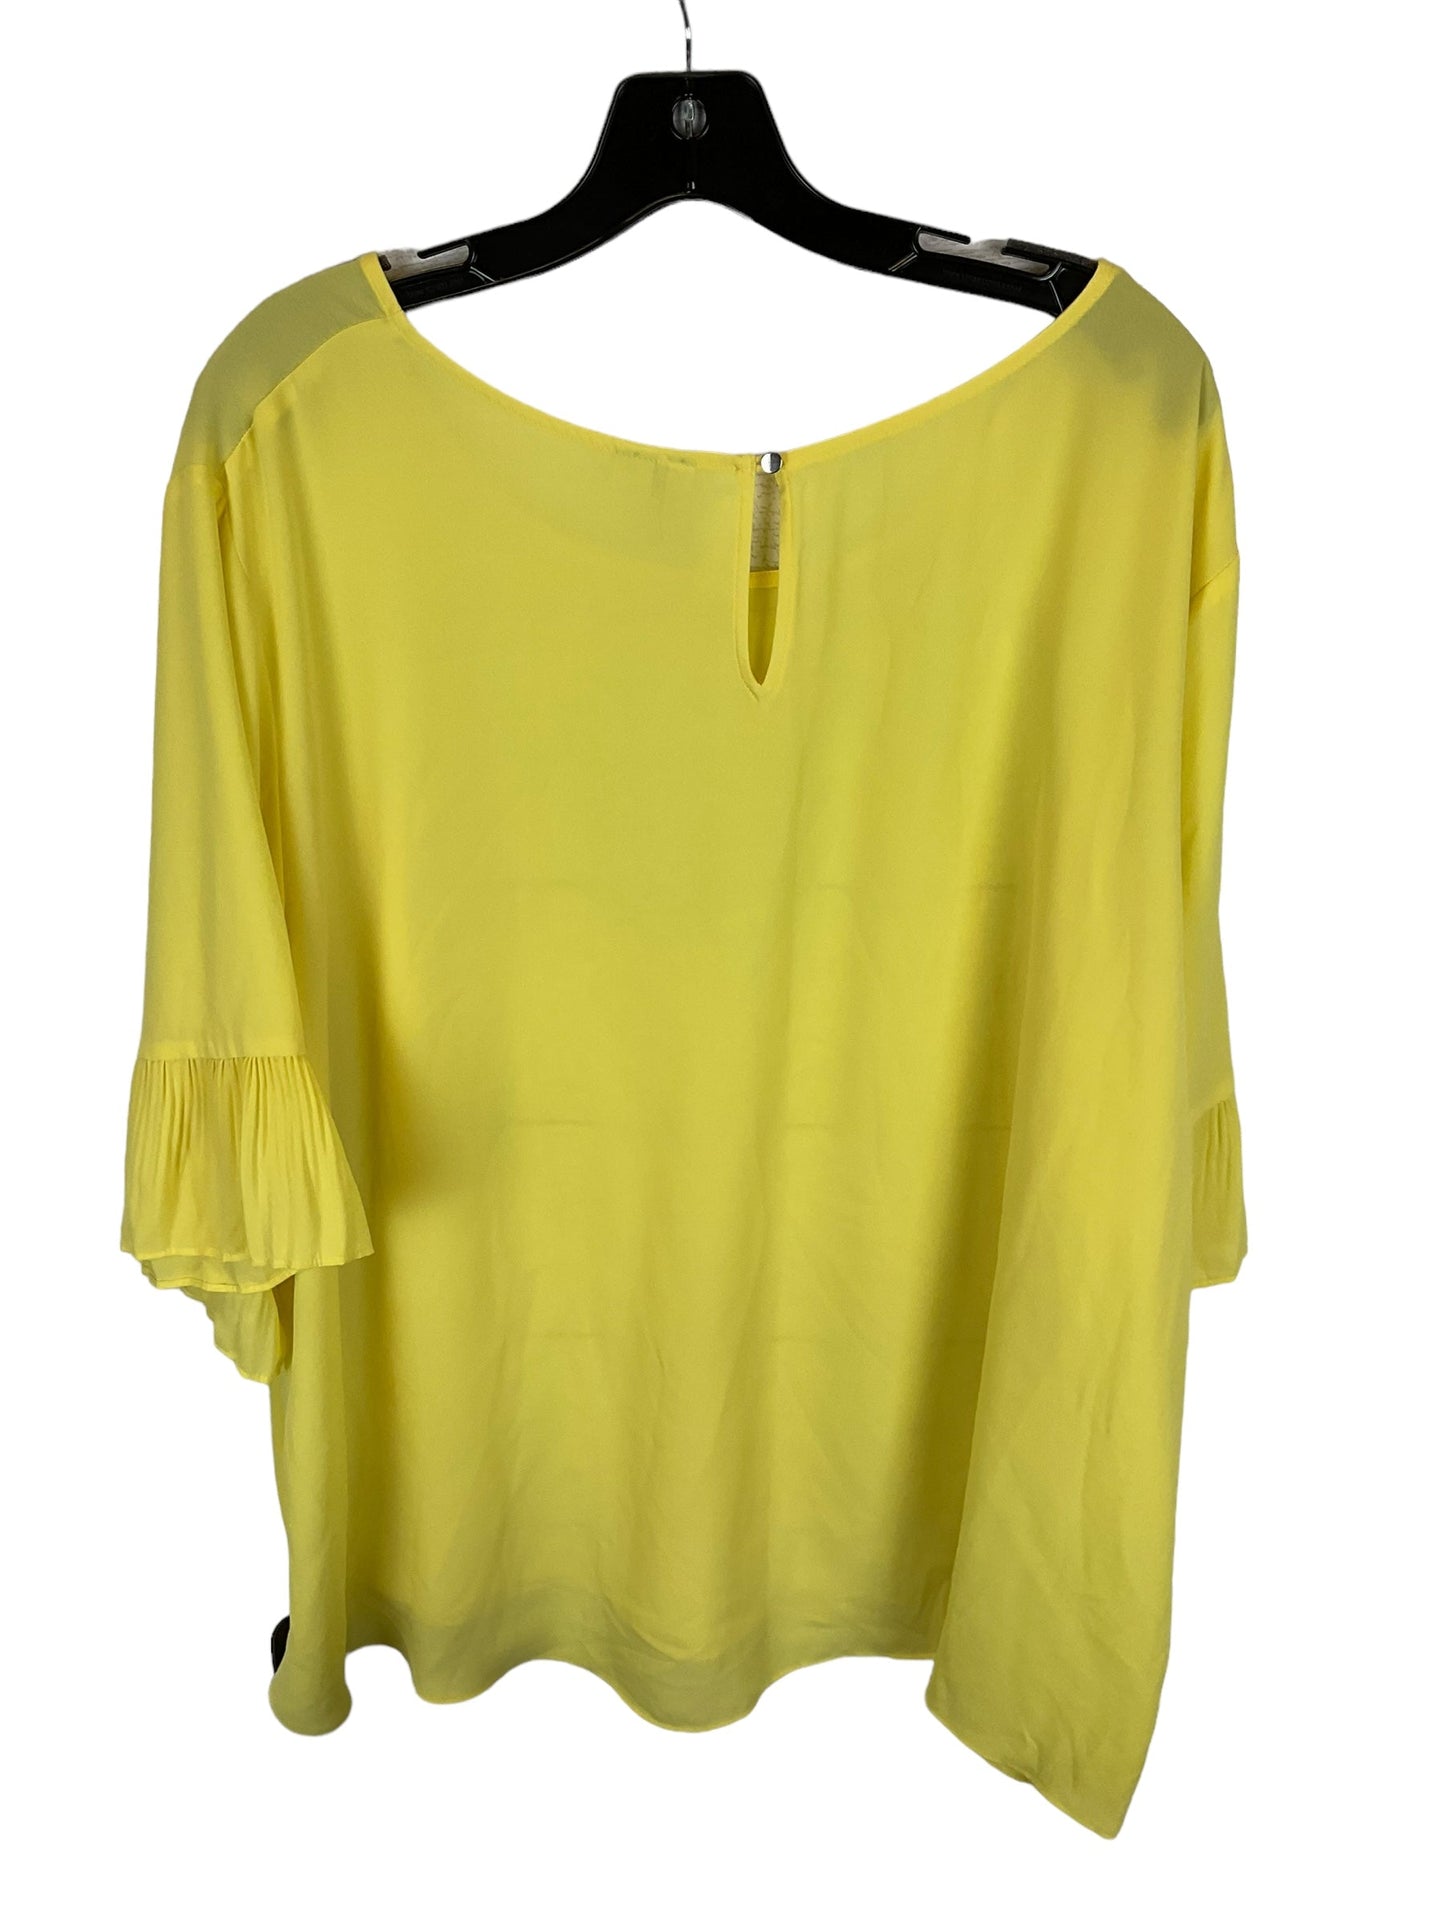 Yellow Top Short Sleeve Cato, Size 4x